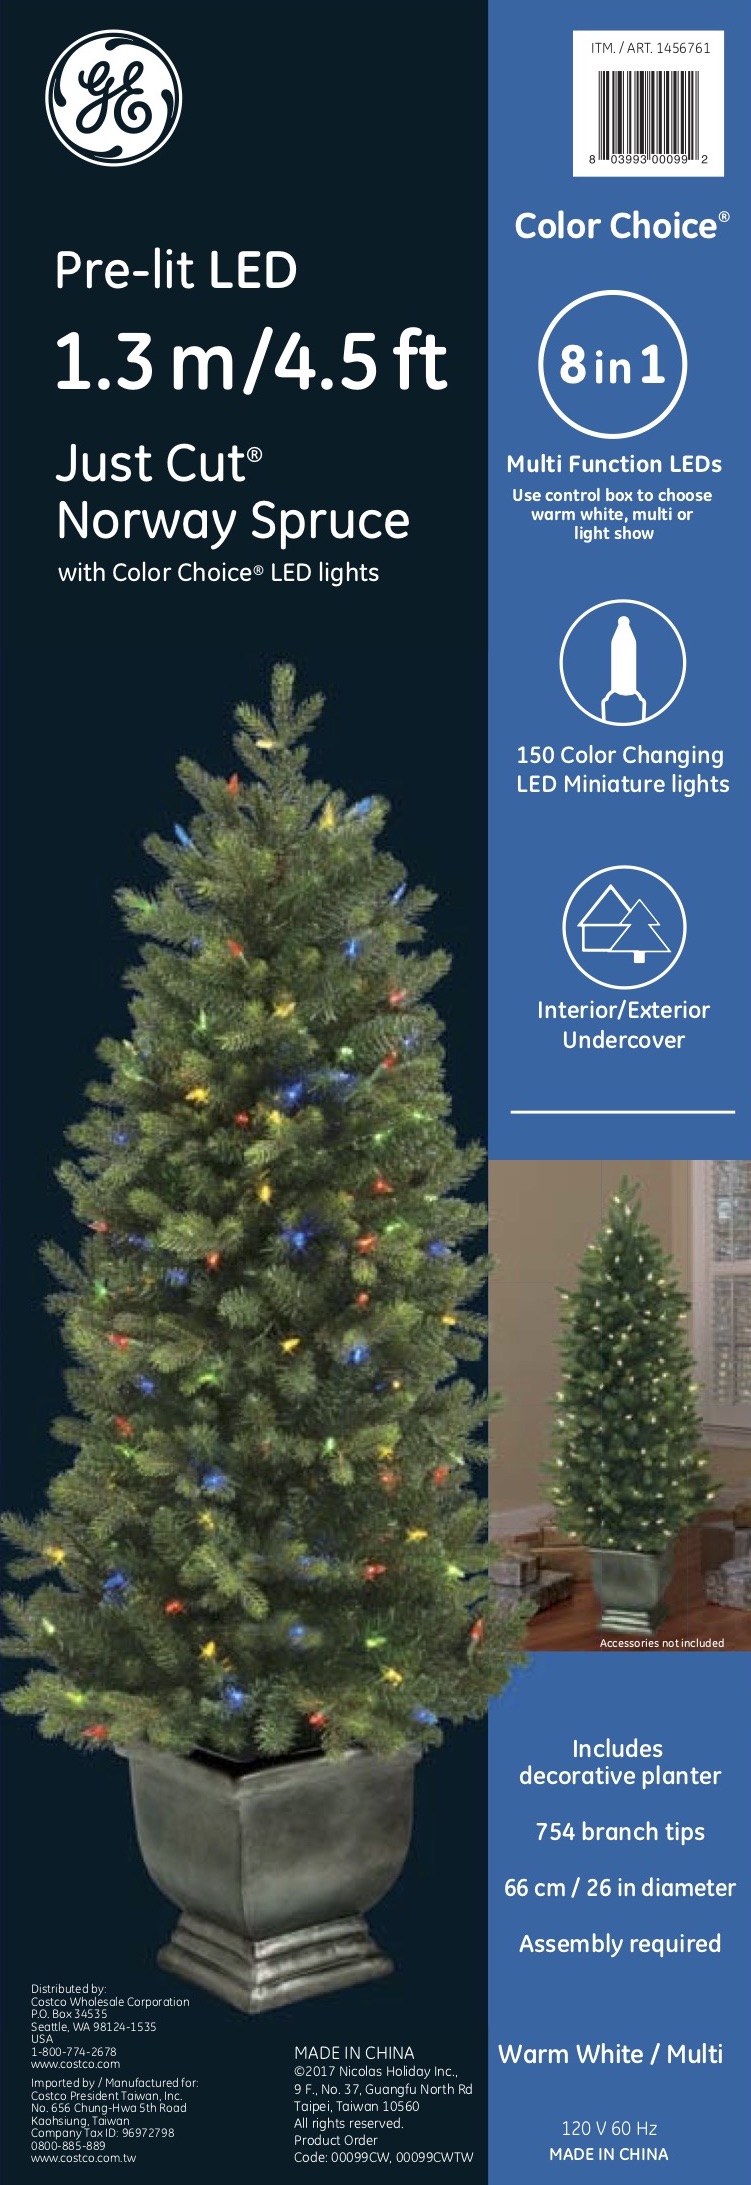 00099 - GE Just Cut® Pre-lit Norway Spruce, 4.5 ft., Color Choice® LED, 150ct 7mm Lights, Warm ...